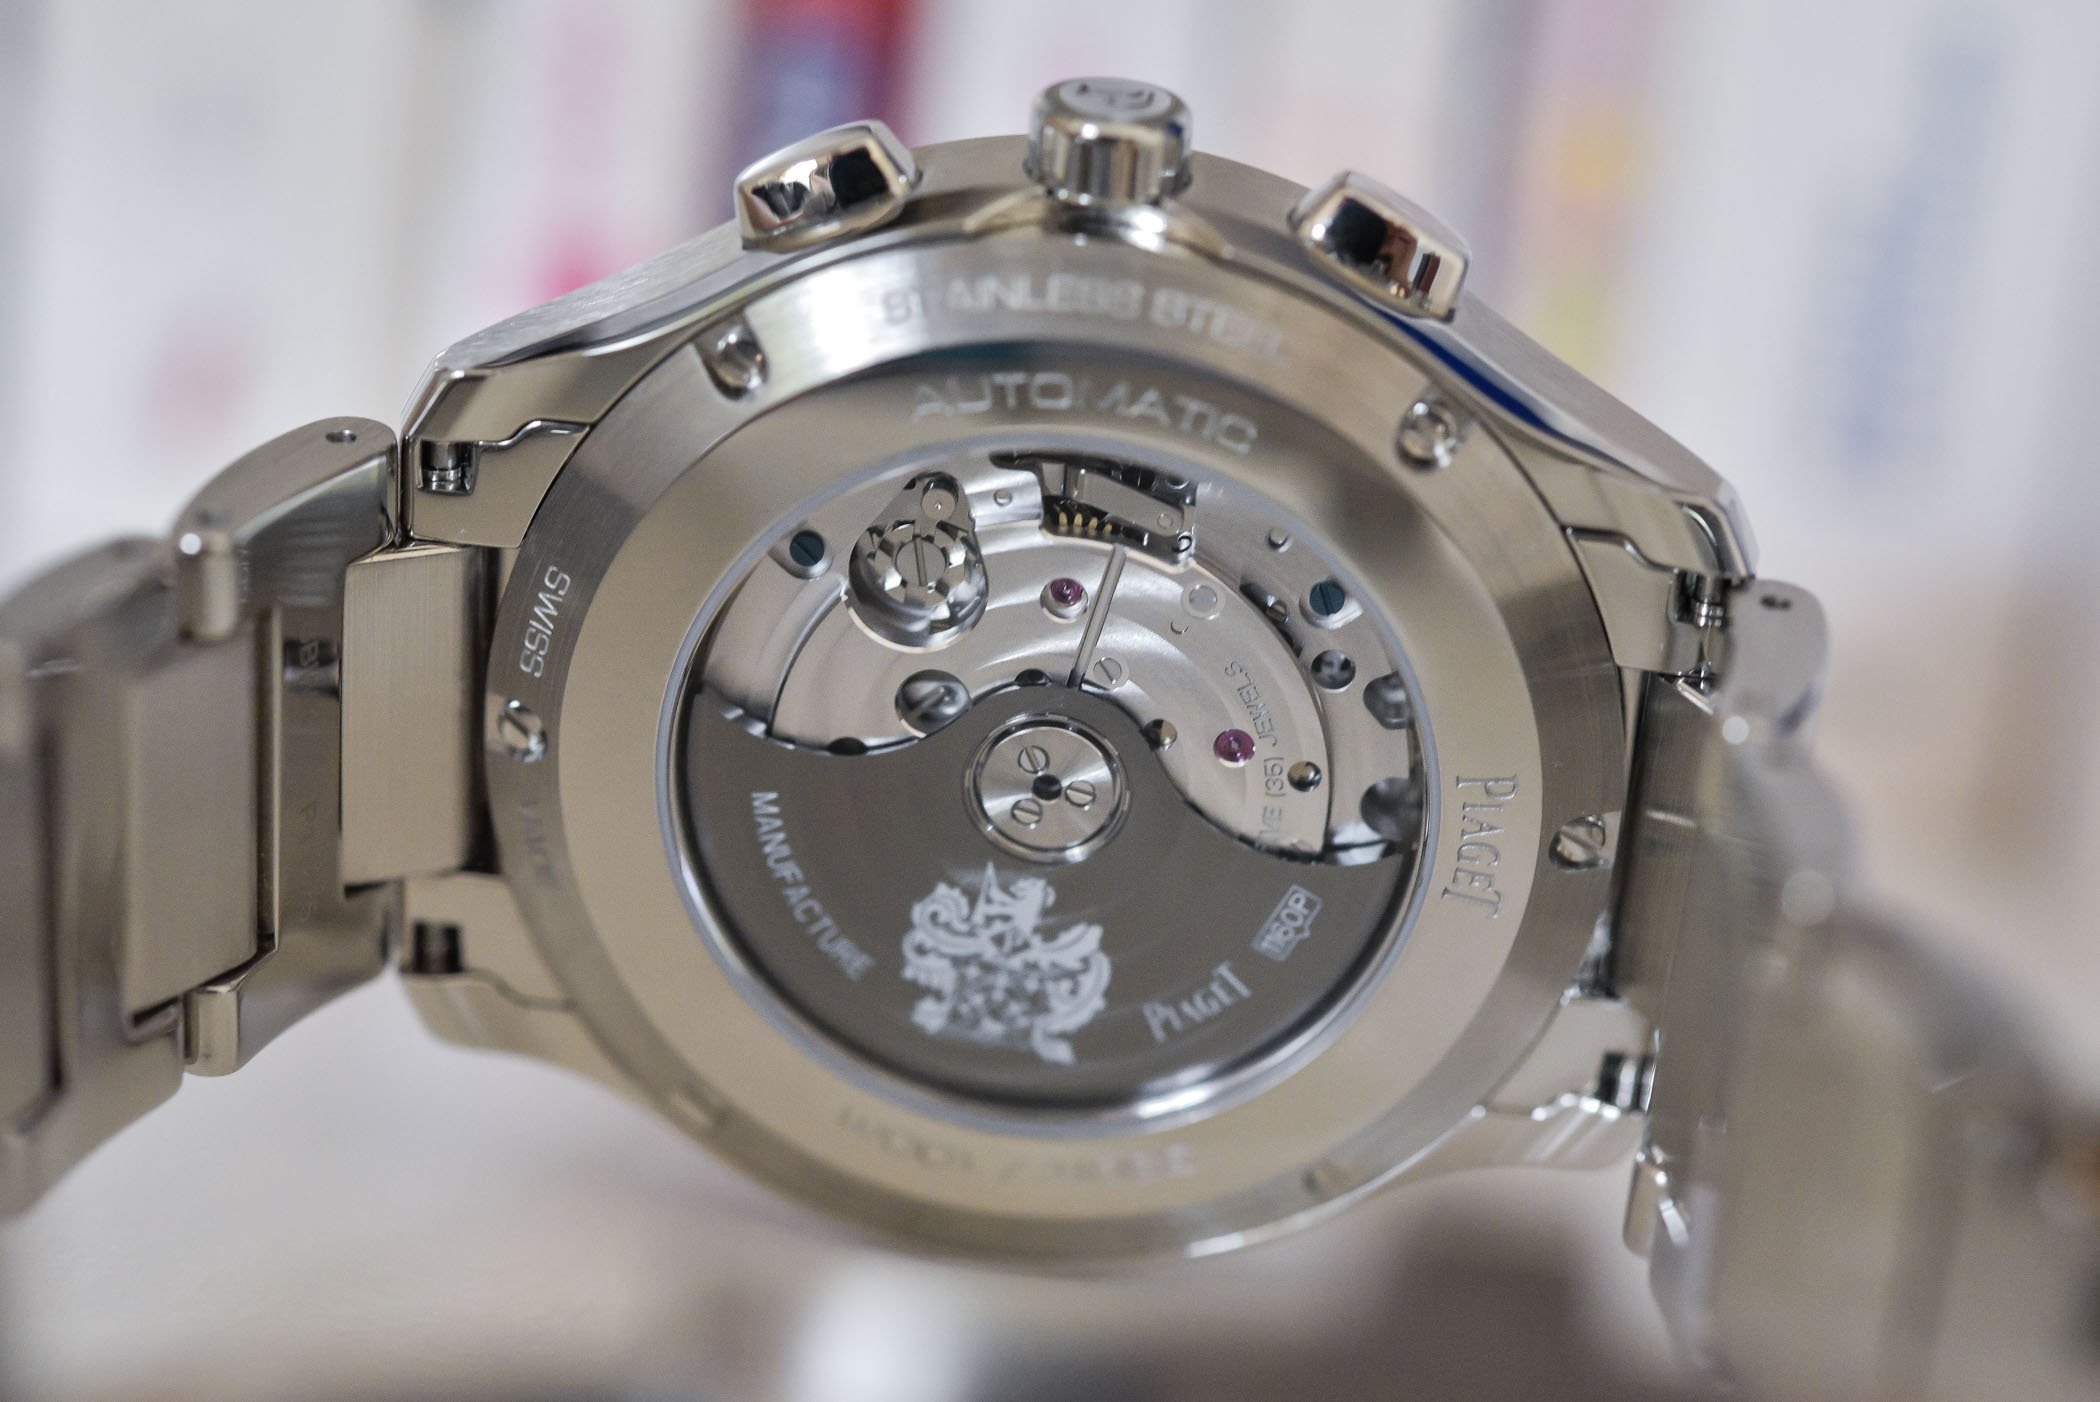 Piaget Polo S Chronograph - Review